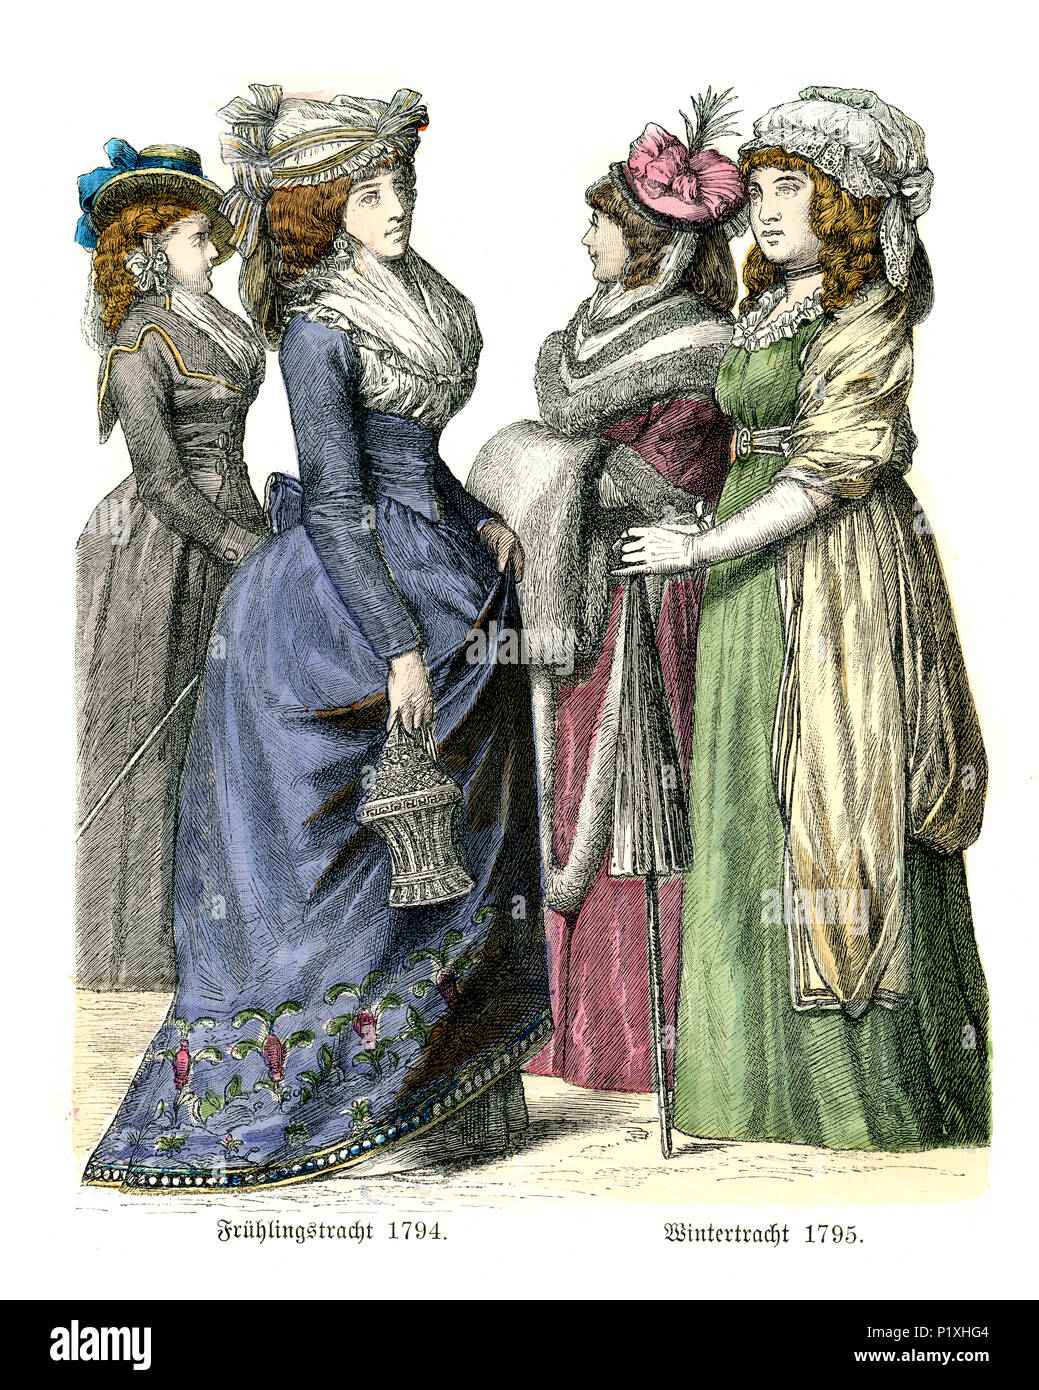 Vintage engraving of History of Fashion, Costumes of Germany late 18th Century, Spring and winter styles Stock Photo